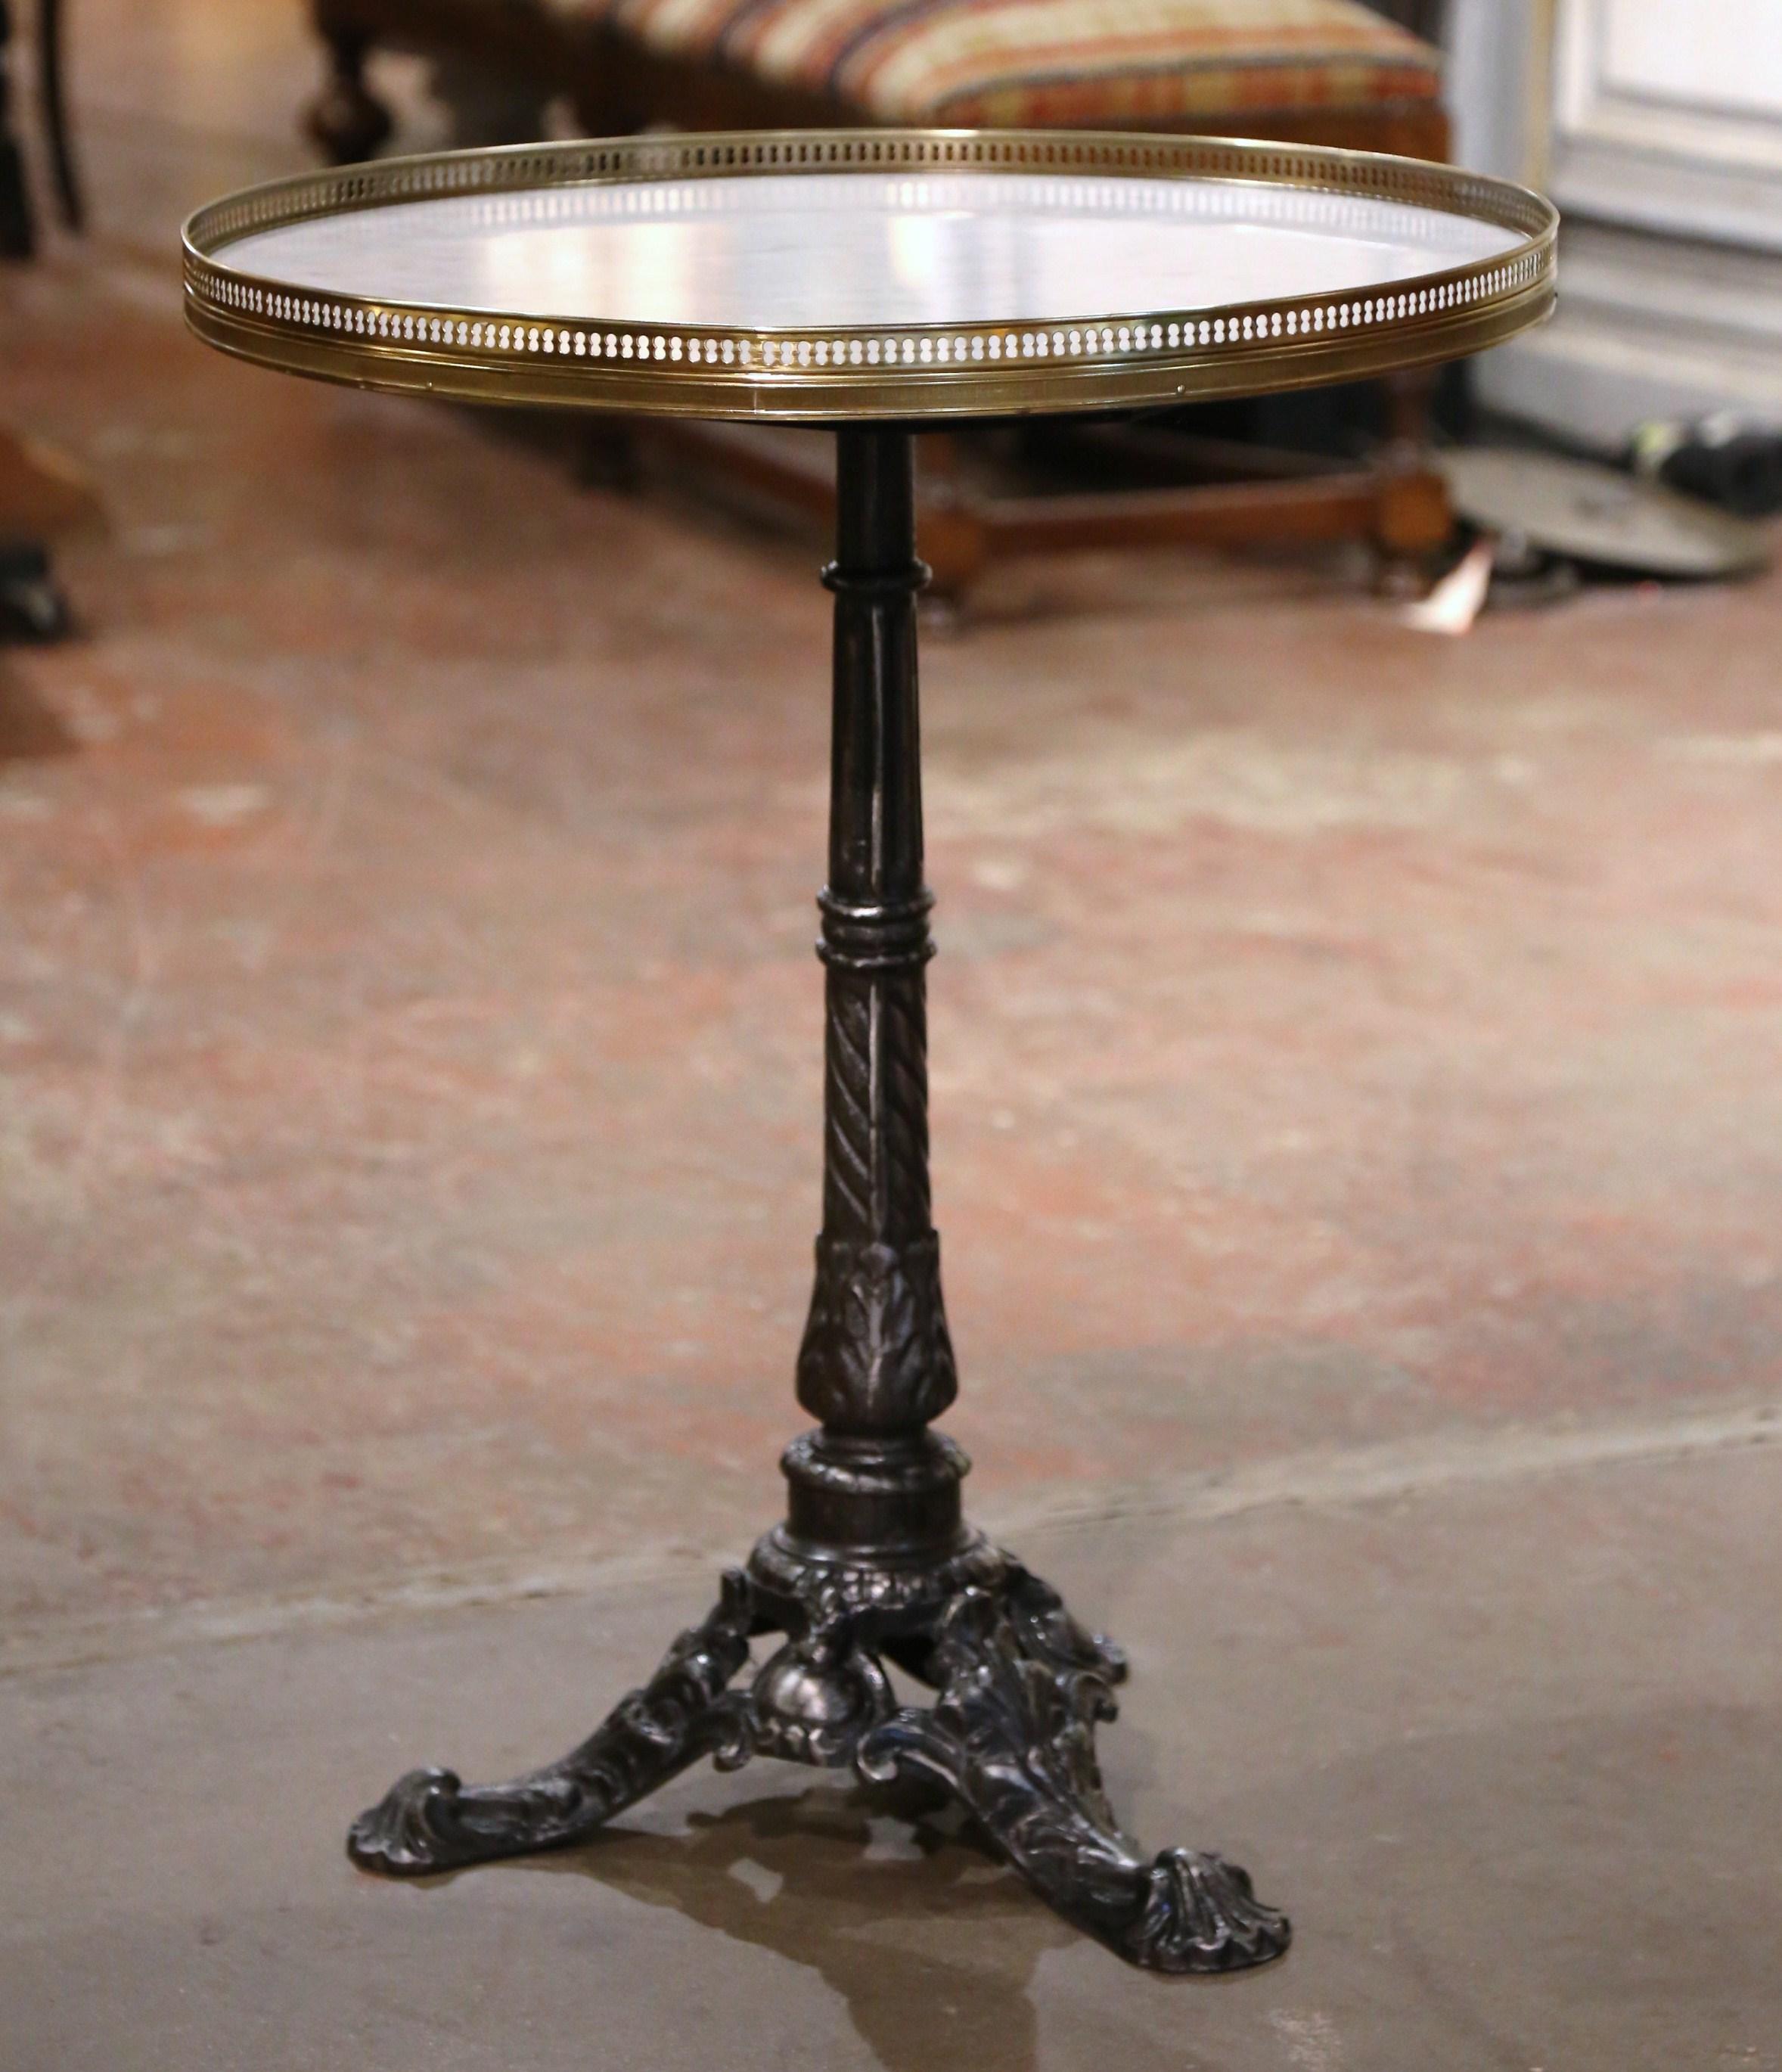 This beautiful antique gueridon was crafted in Paris, France, circa 1870. The intricate iron base sits on three paw feet over a carved stem embellished with acanthus leaf motifs. The surface is dressed with a white and grey marble top set inside a